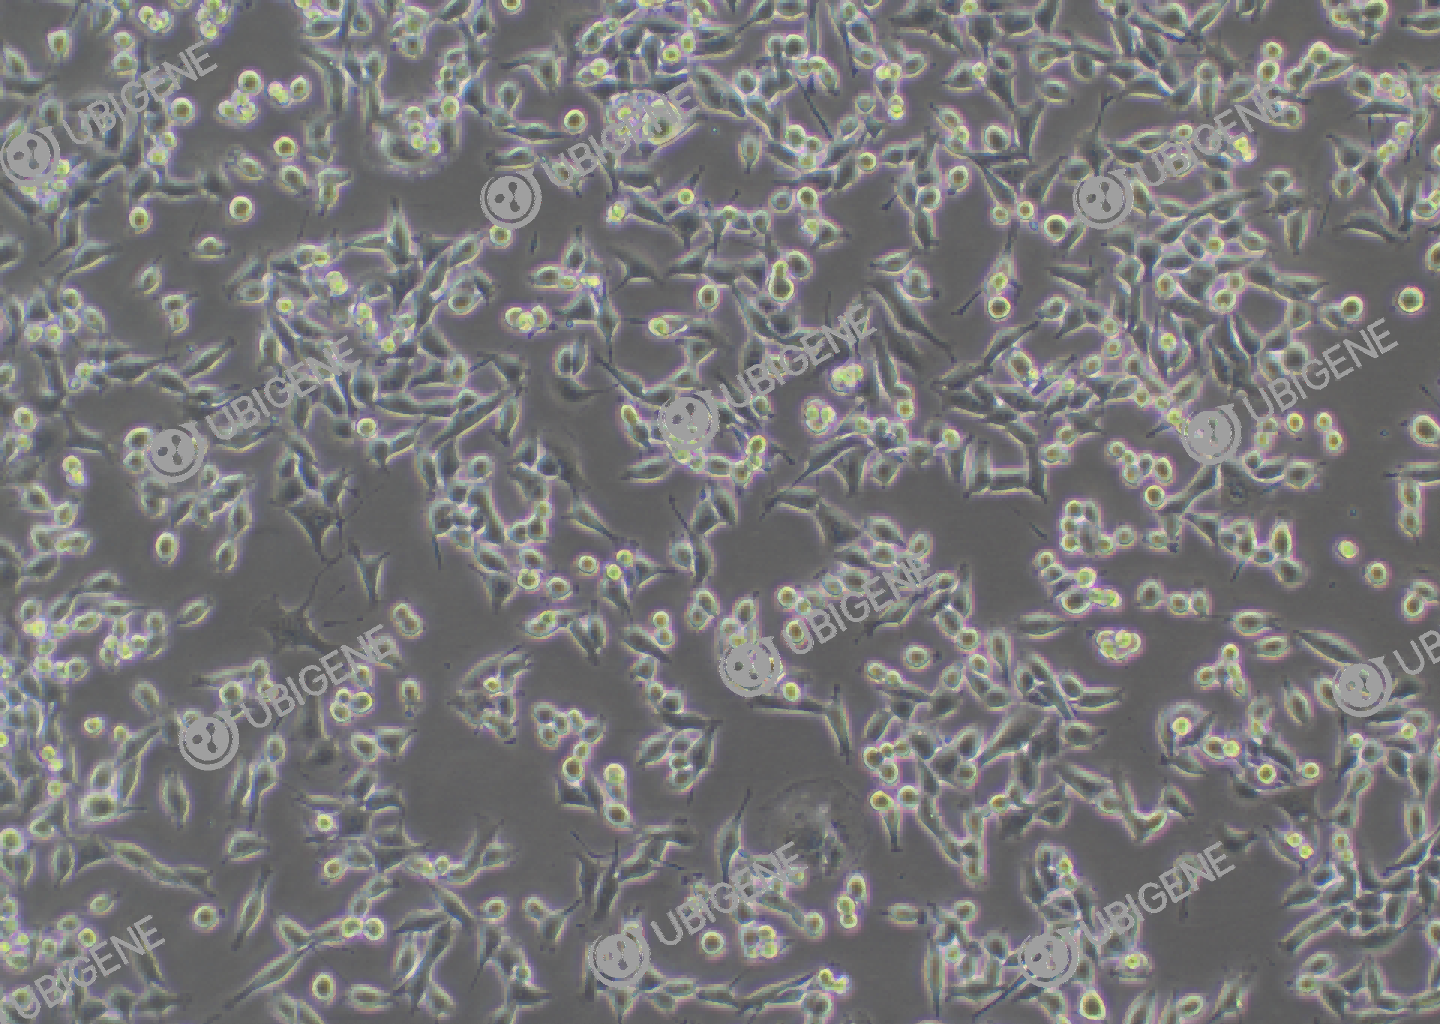 MC38 cell line Cultured cell morphology